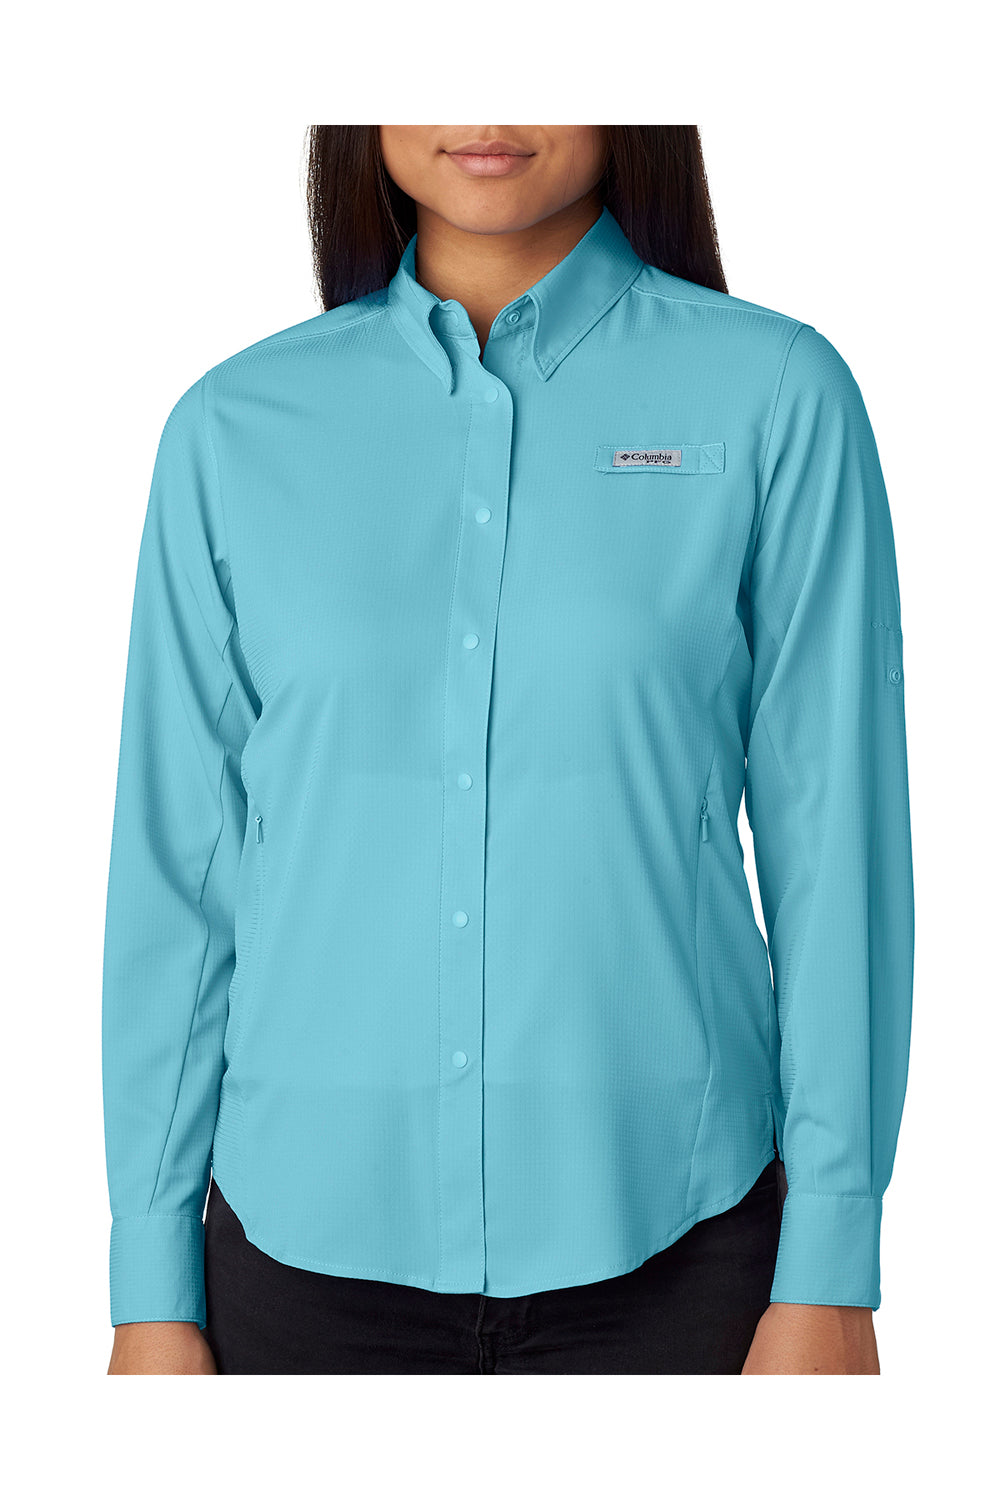 Columbia 7278 Womens Tamiami II Moisture Wicking Long Sleeve Button Down Shirt w/ Double Pockets Clear Blue Front